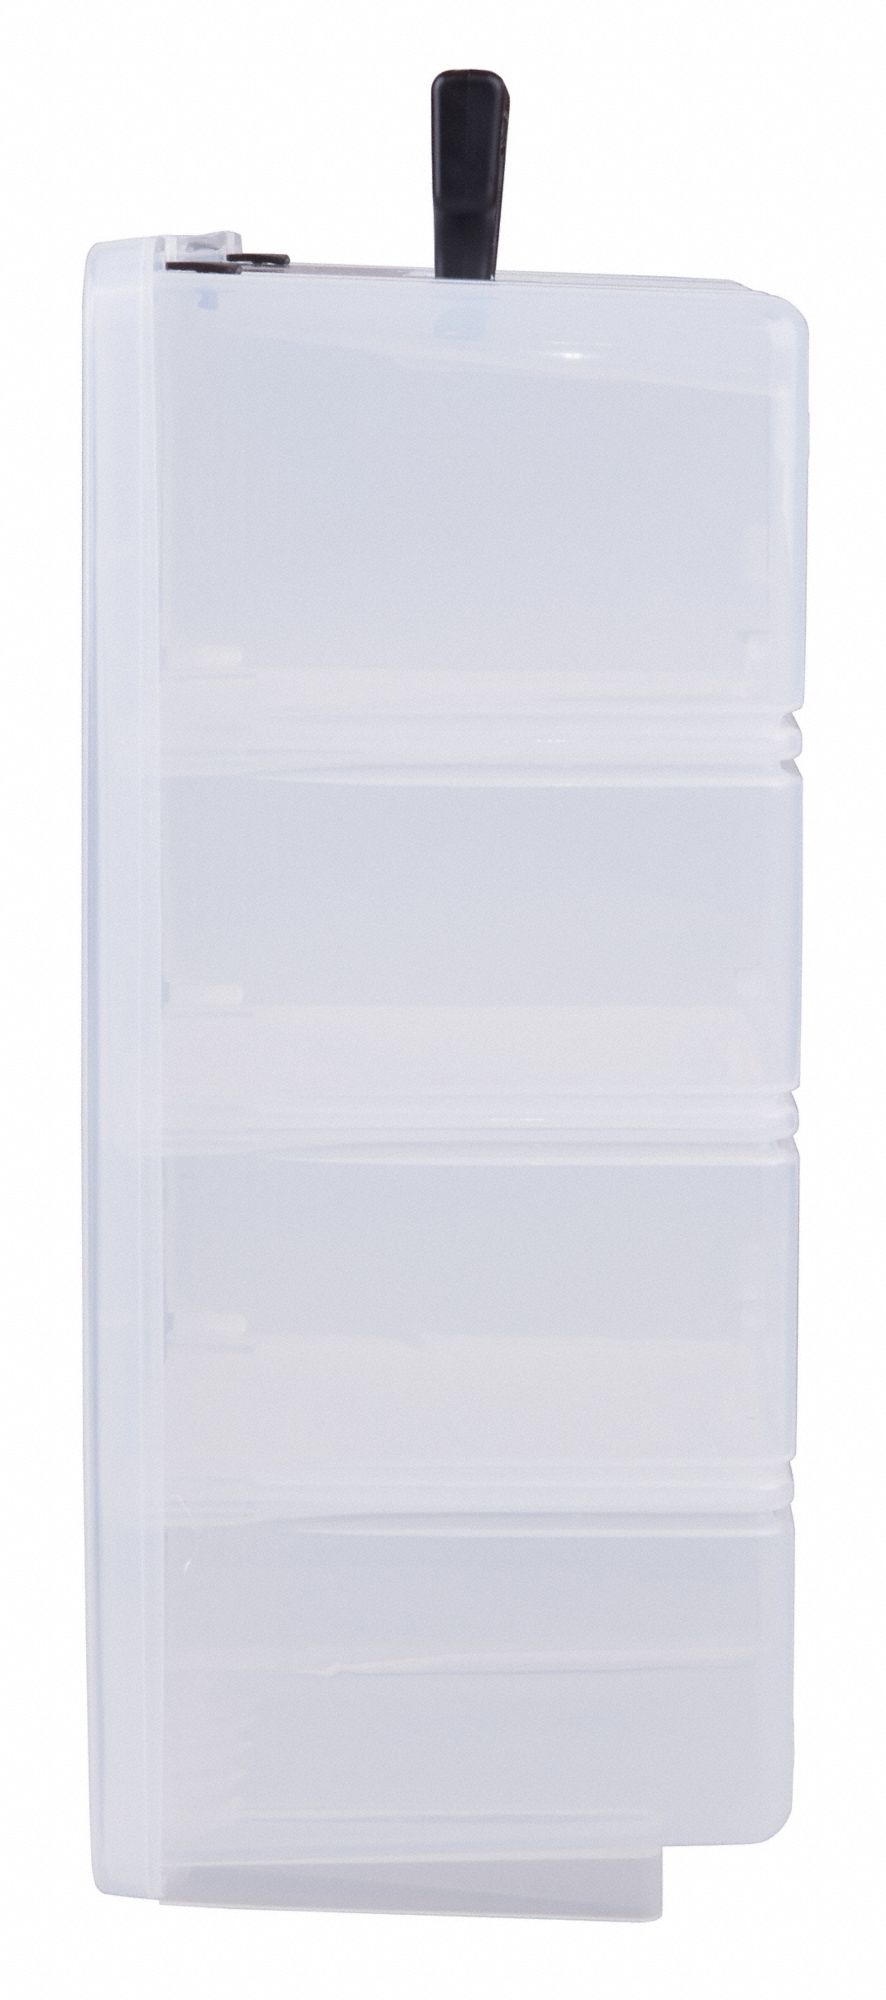 FLAMBEAU Adjustable Compartment Box: 14 1/8 in x 6 1/4 in, Clear, 8 ...